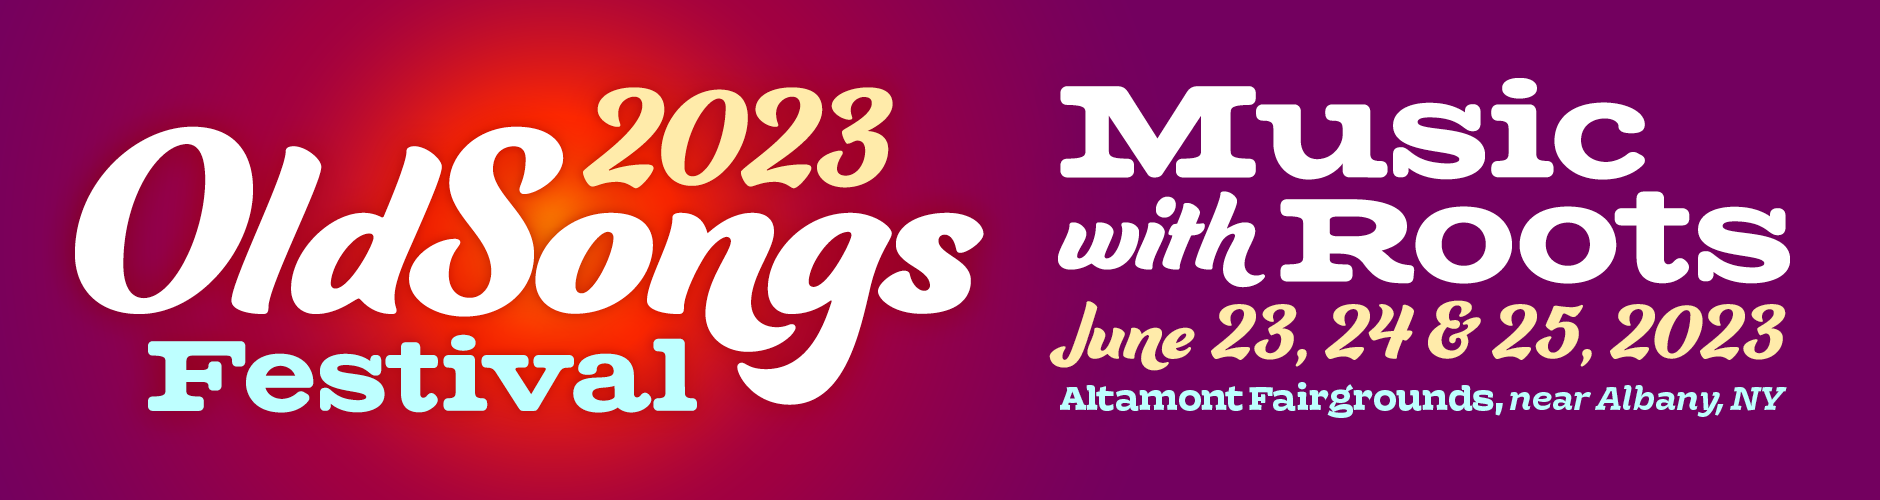 2023 Old Songs Festival — Music with Roots